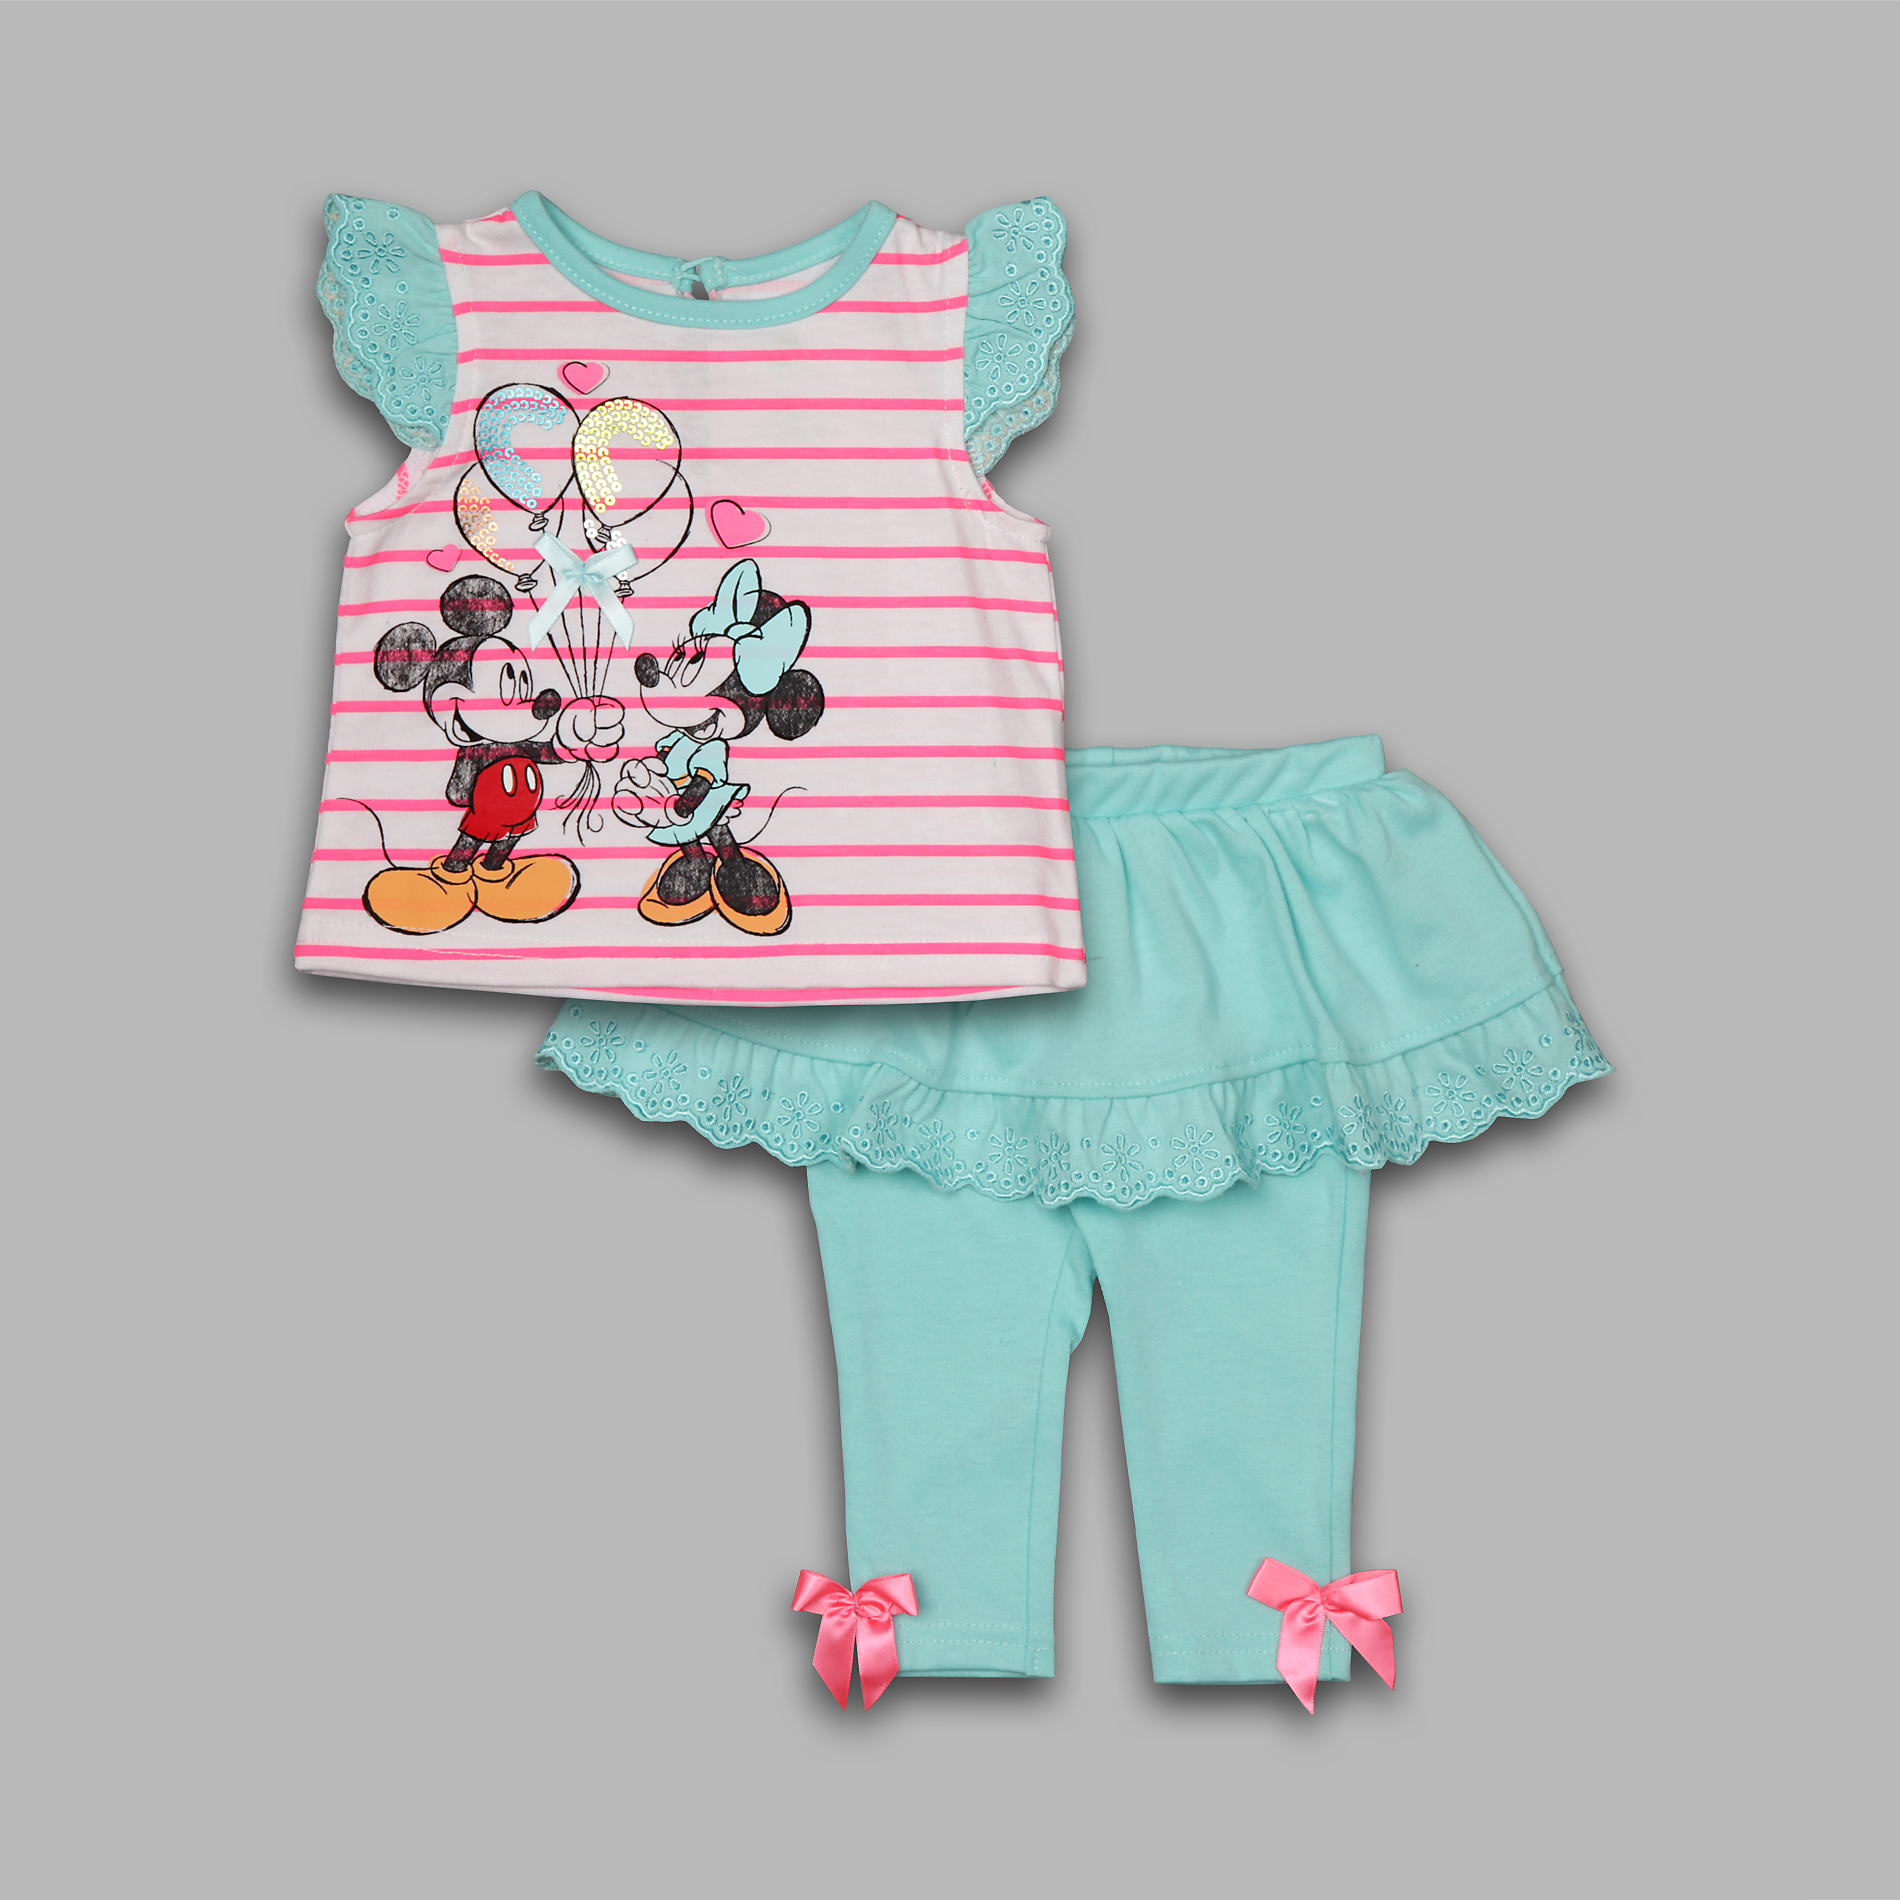 Disney Newborn Girl's 2 Pc Top and Leggings Eyelet Mickey and Minnie Set